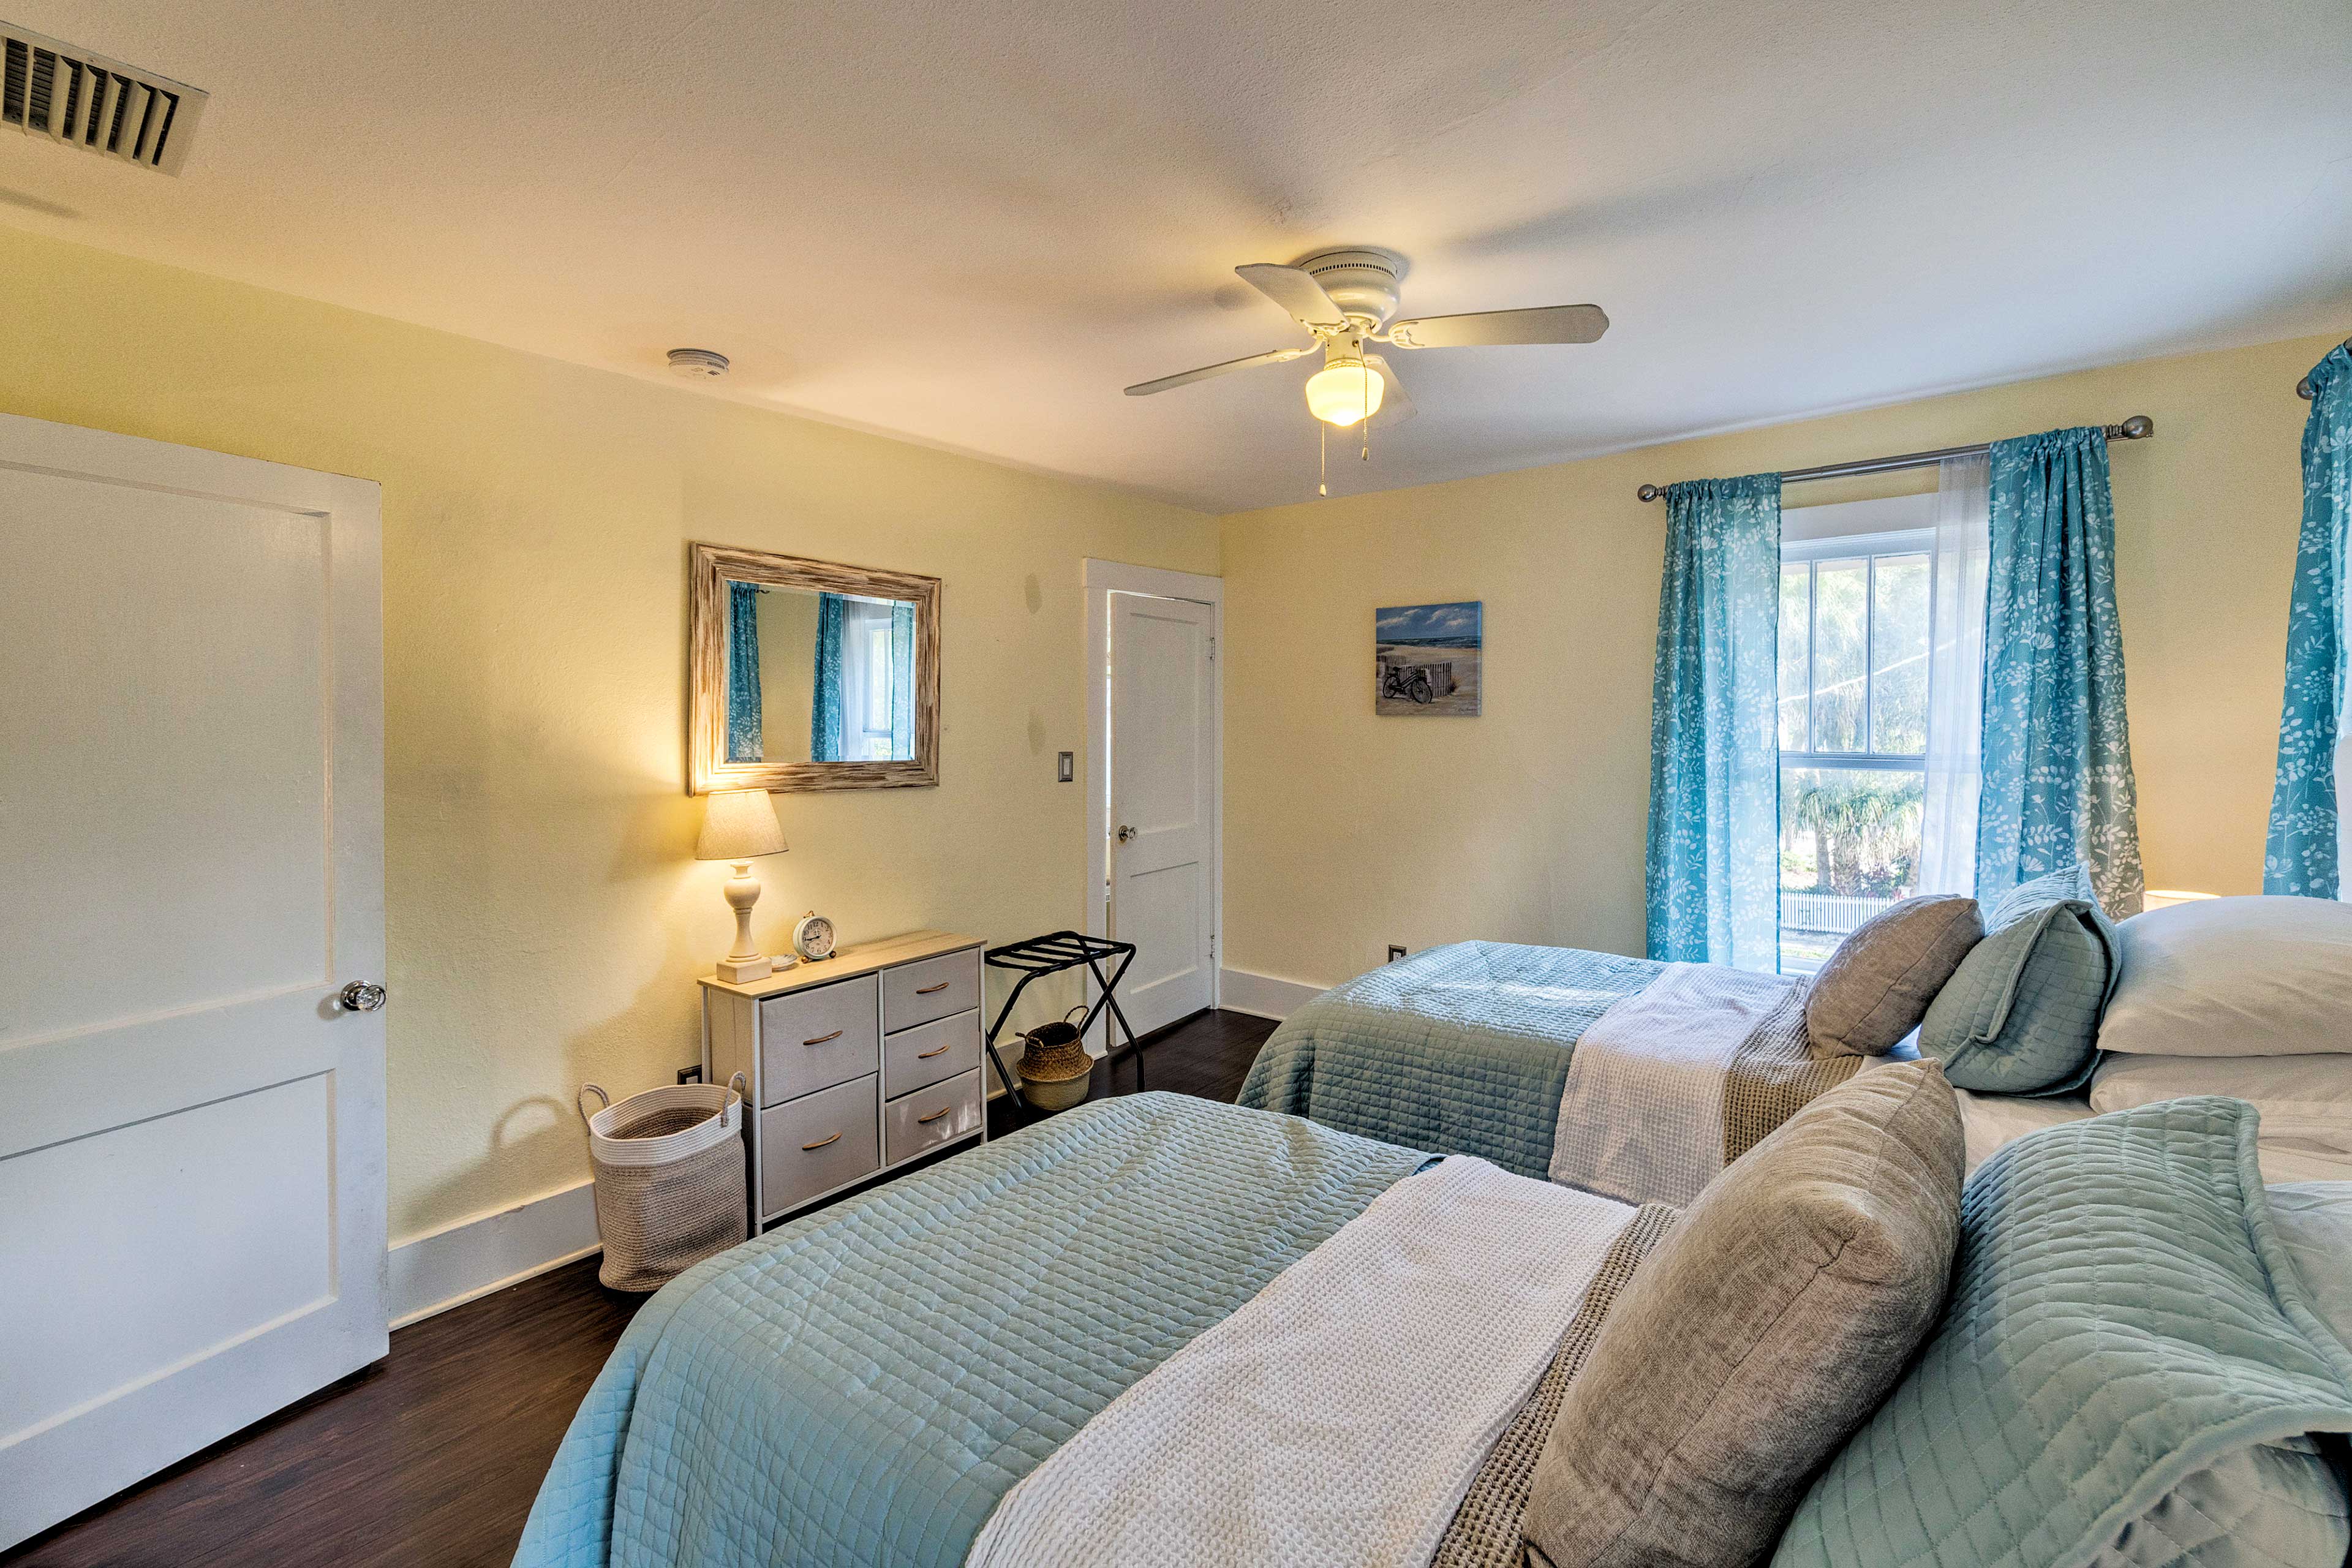 The ceiling fan is sure to keep you cool while you sleep.